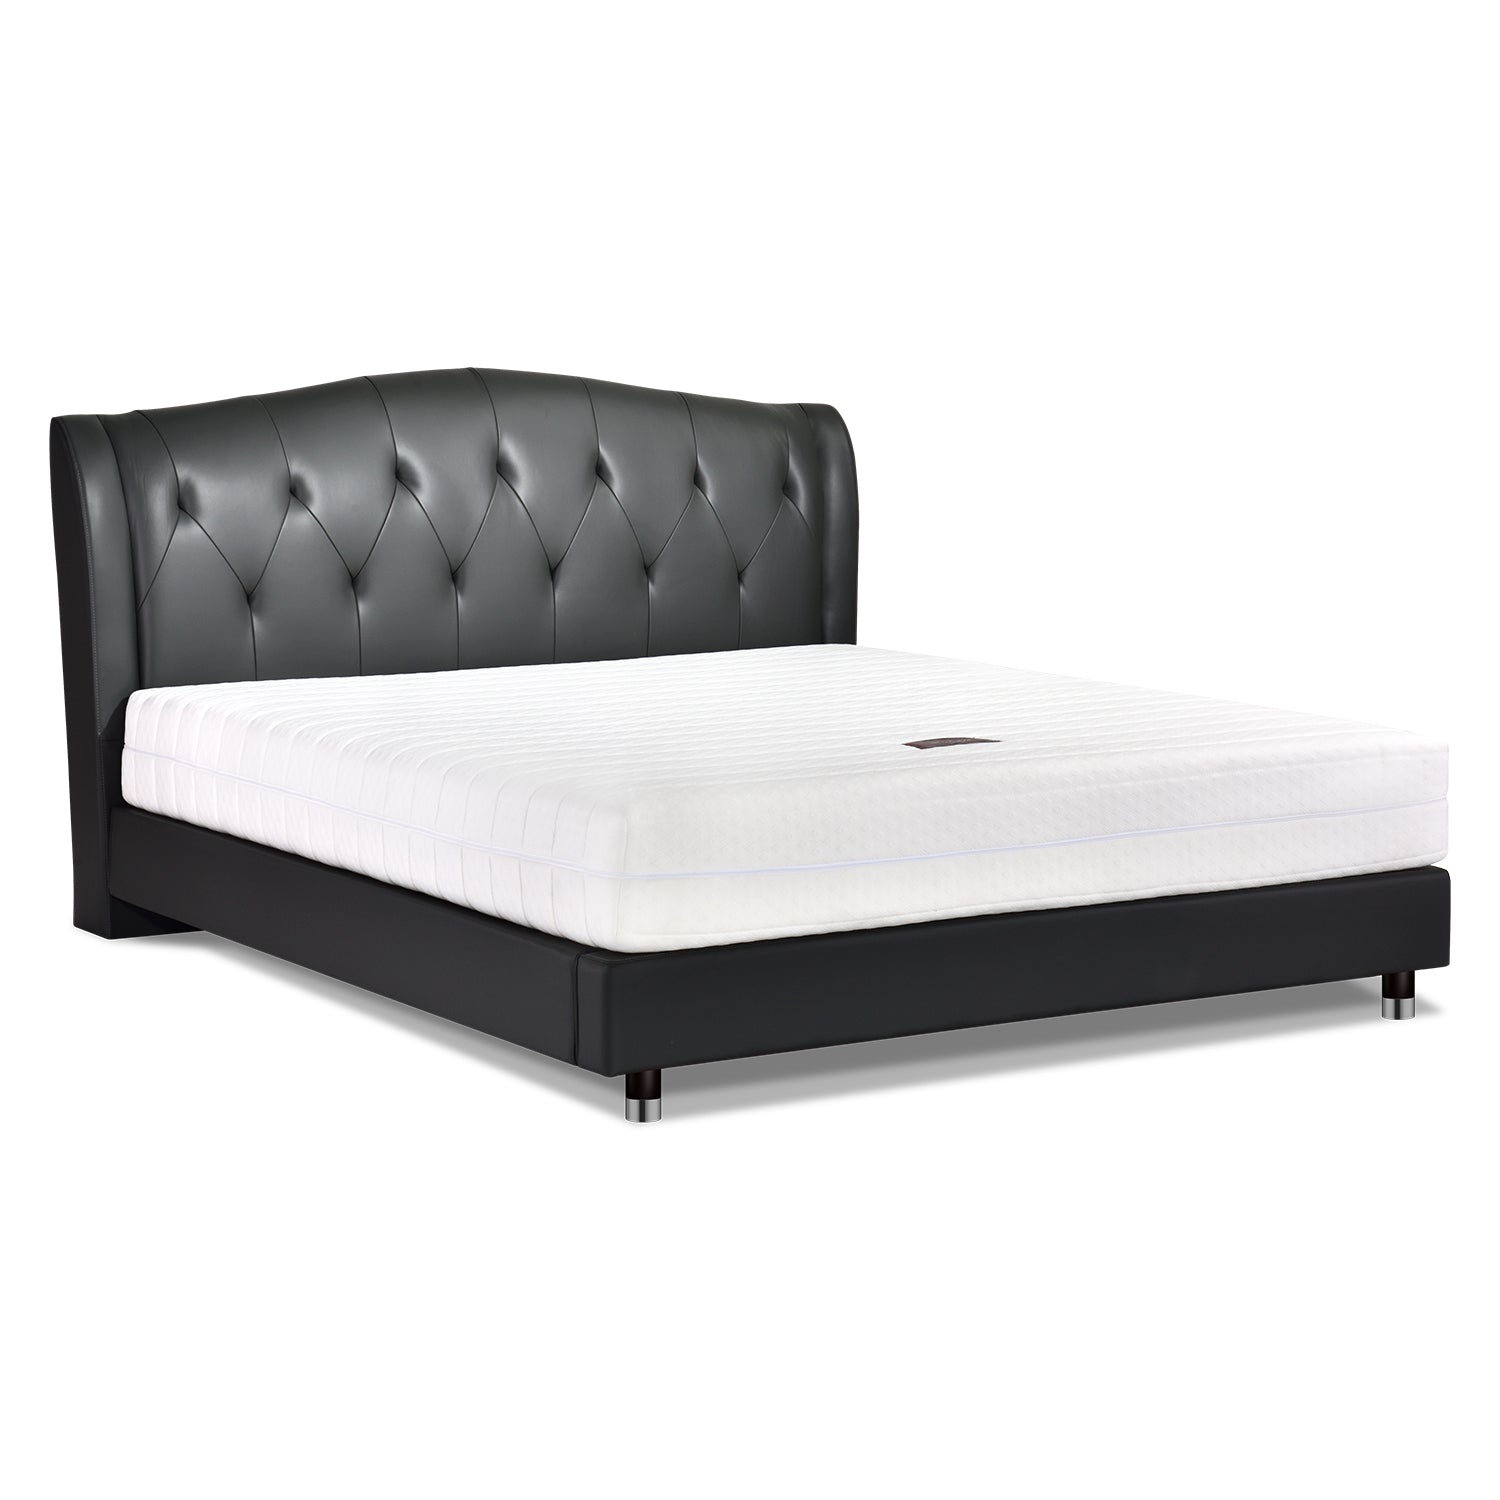 Black leather bed frame with tufted headboard and white mattress from DeRUCCI, featuring embedded buckles for a hint of glamour.